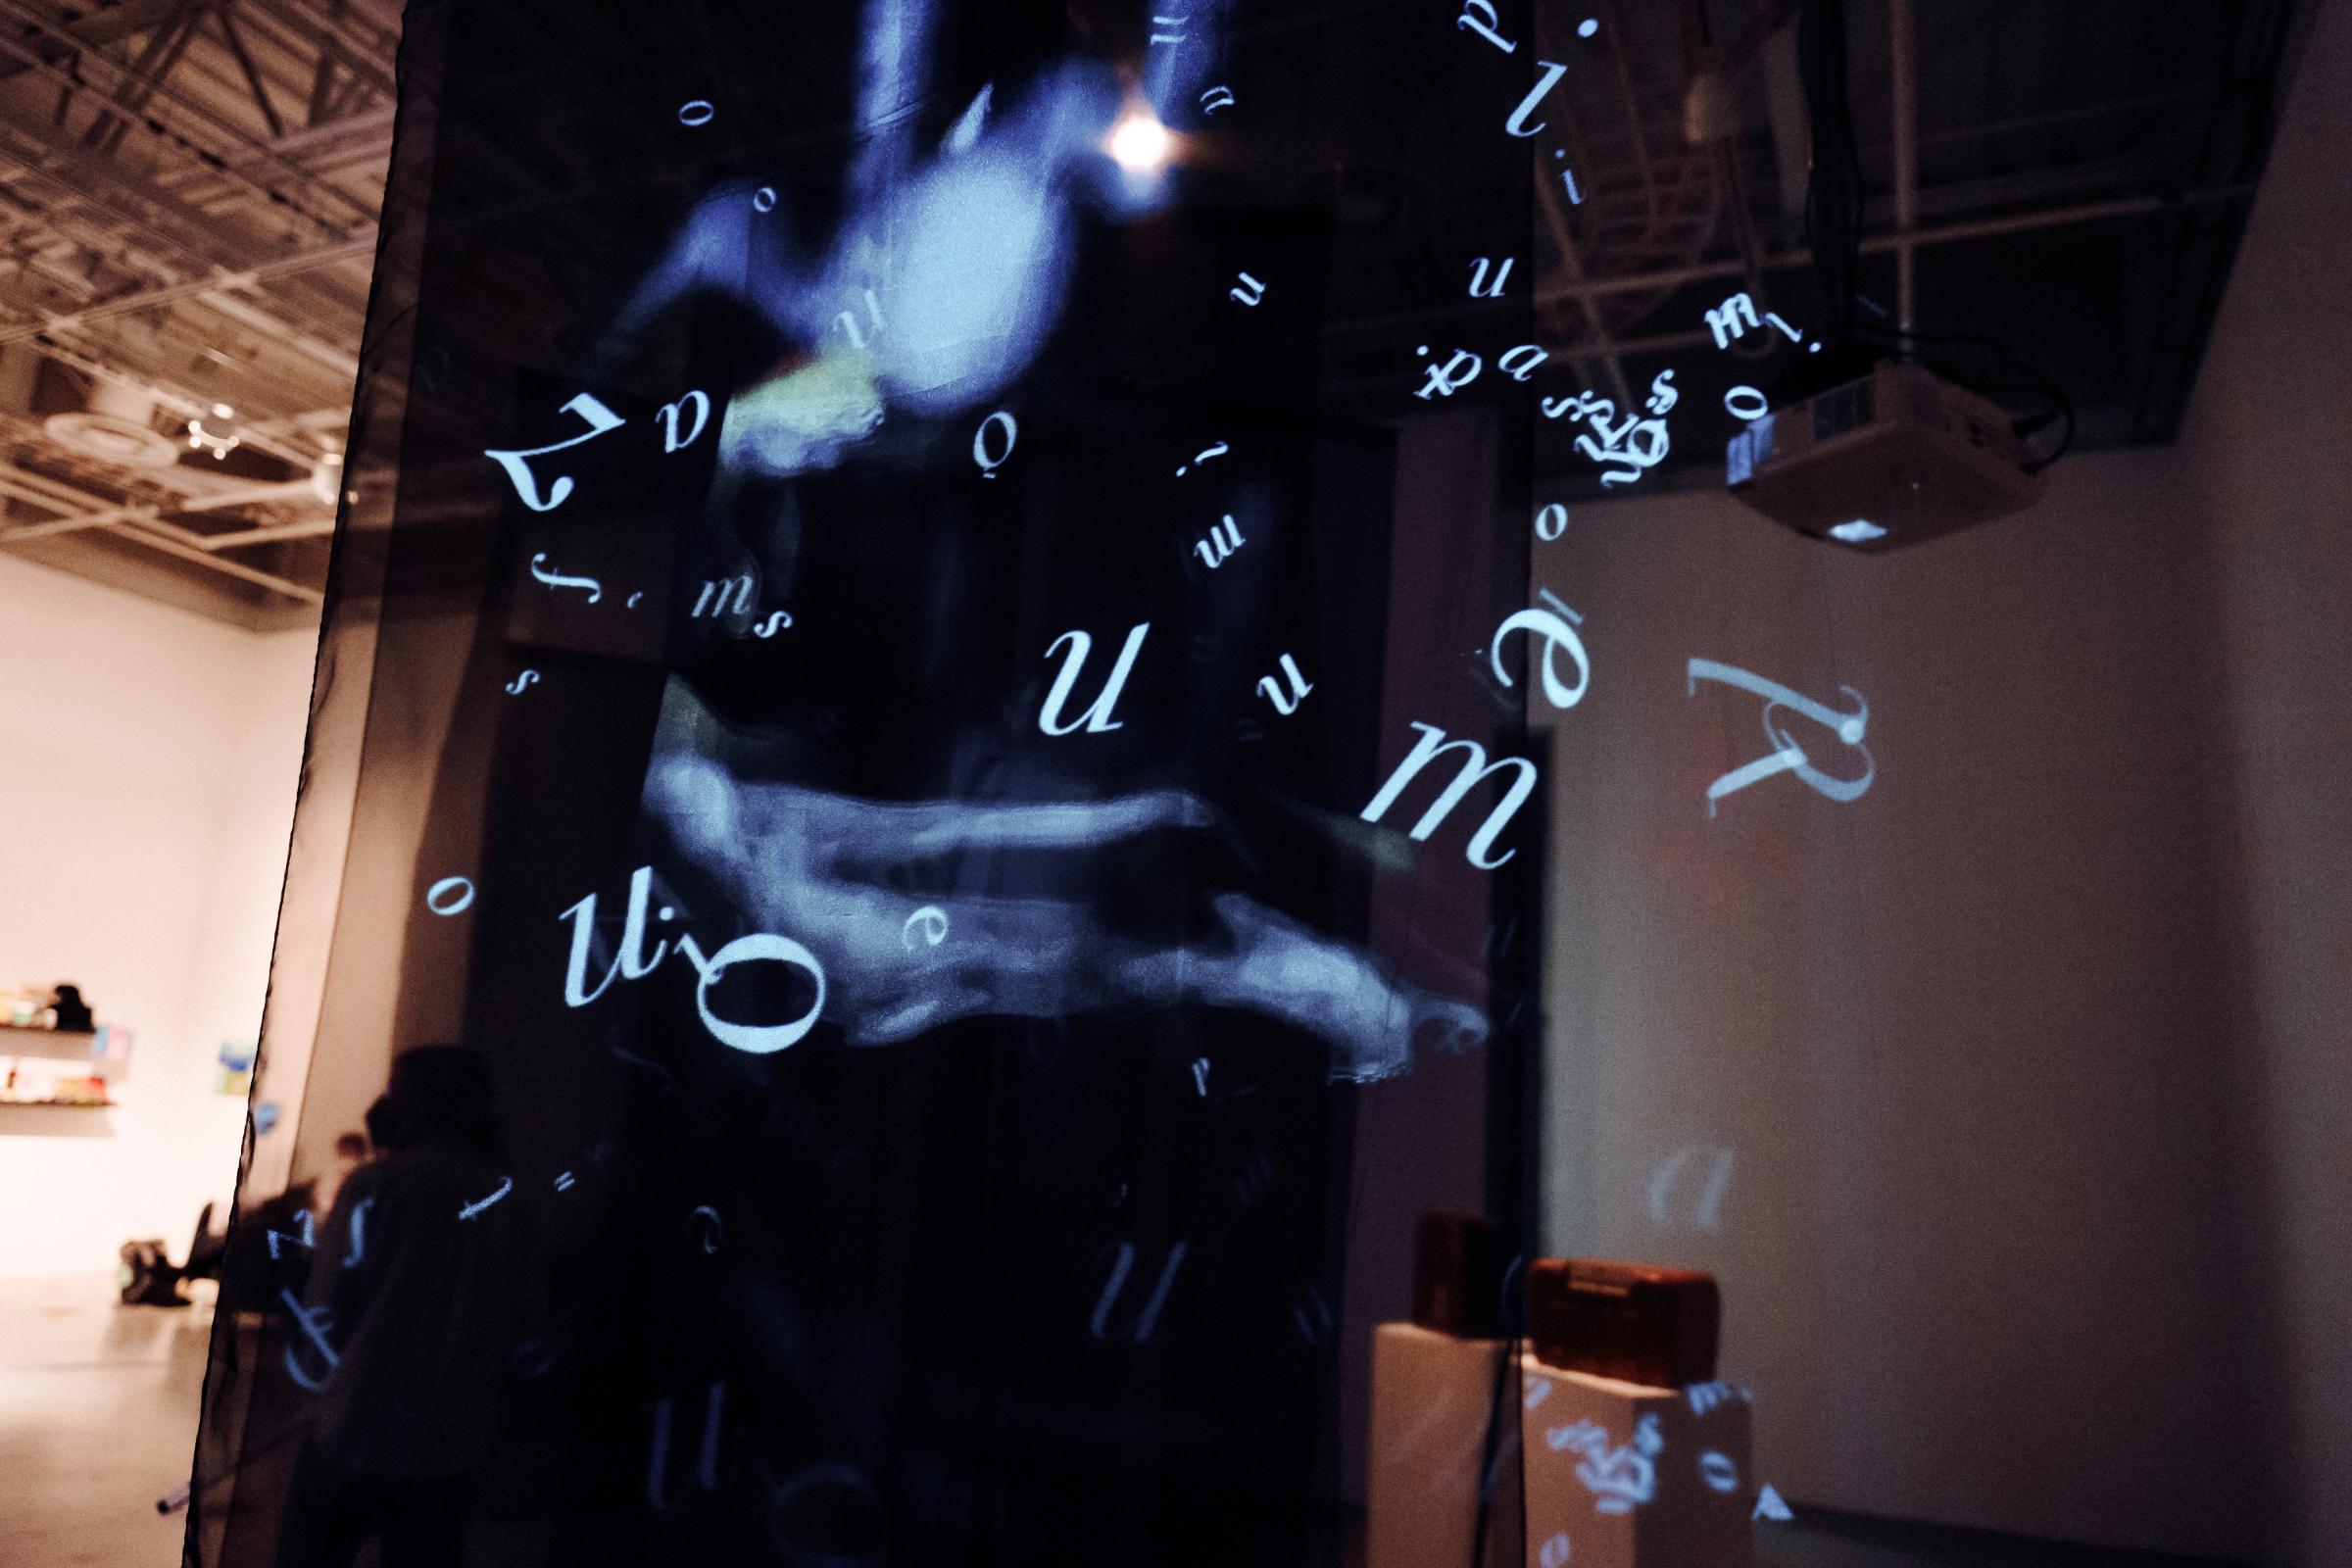 Projected in white onto translucent black fabric, a spray of letters pattern the blurry image of a piano player. 

